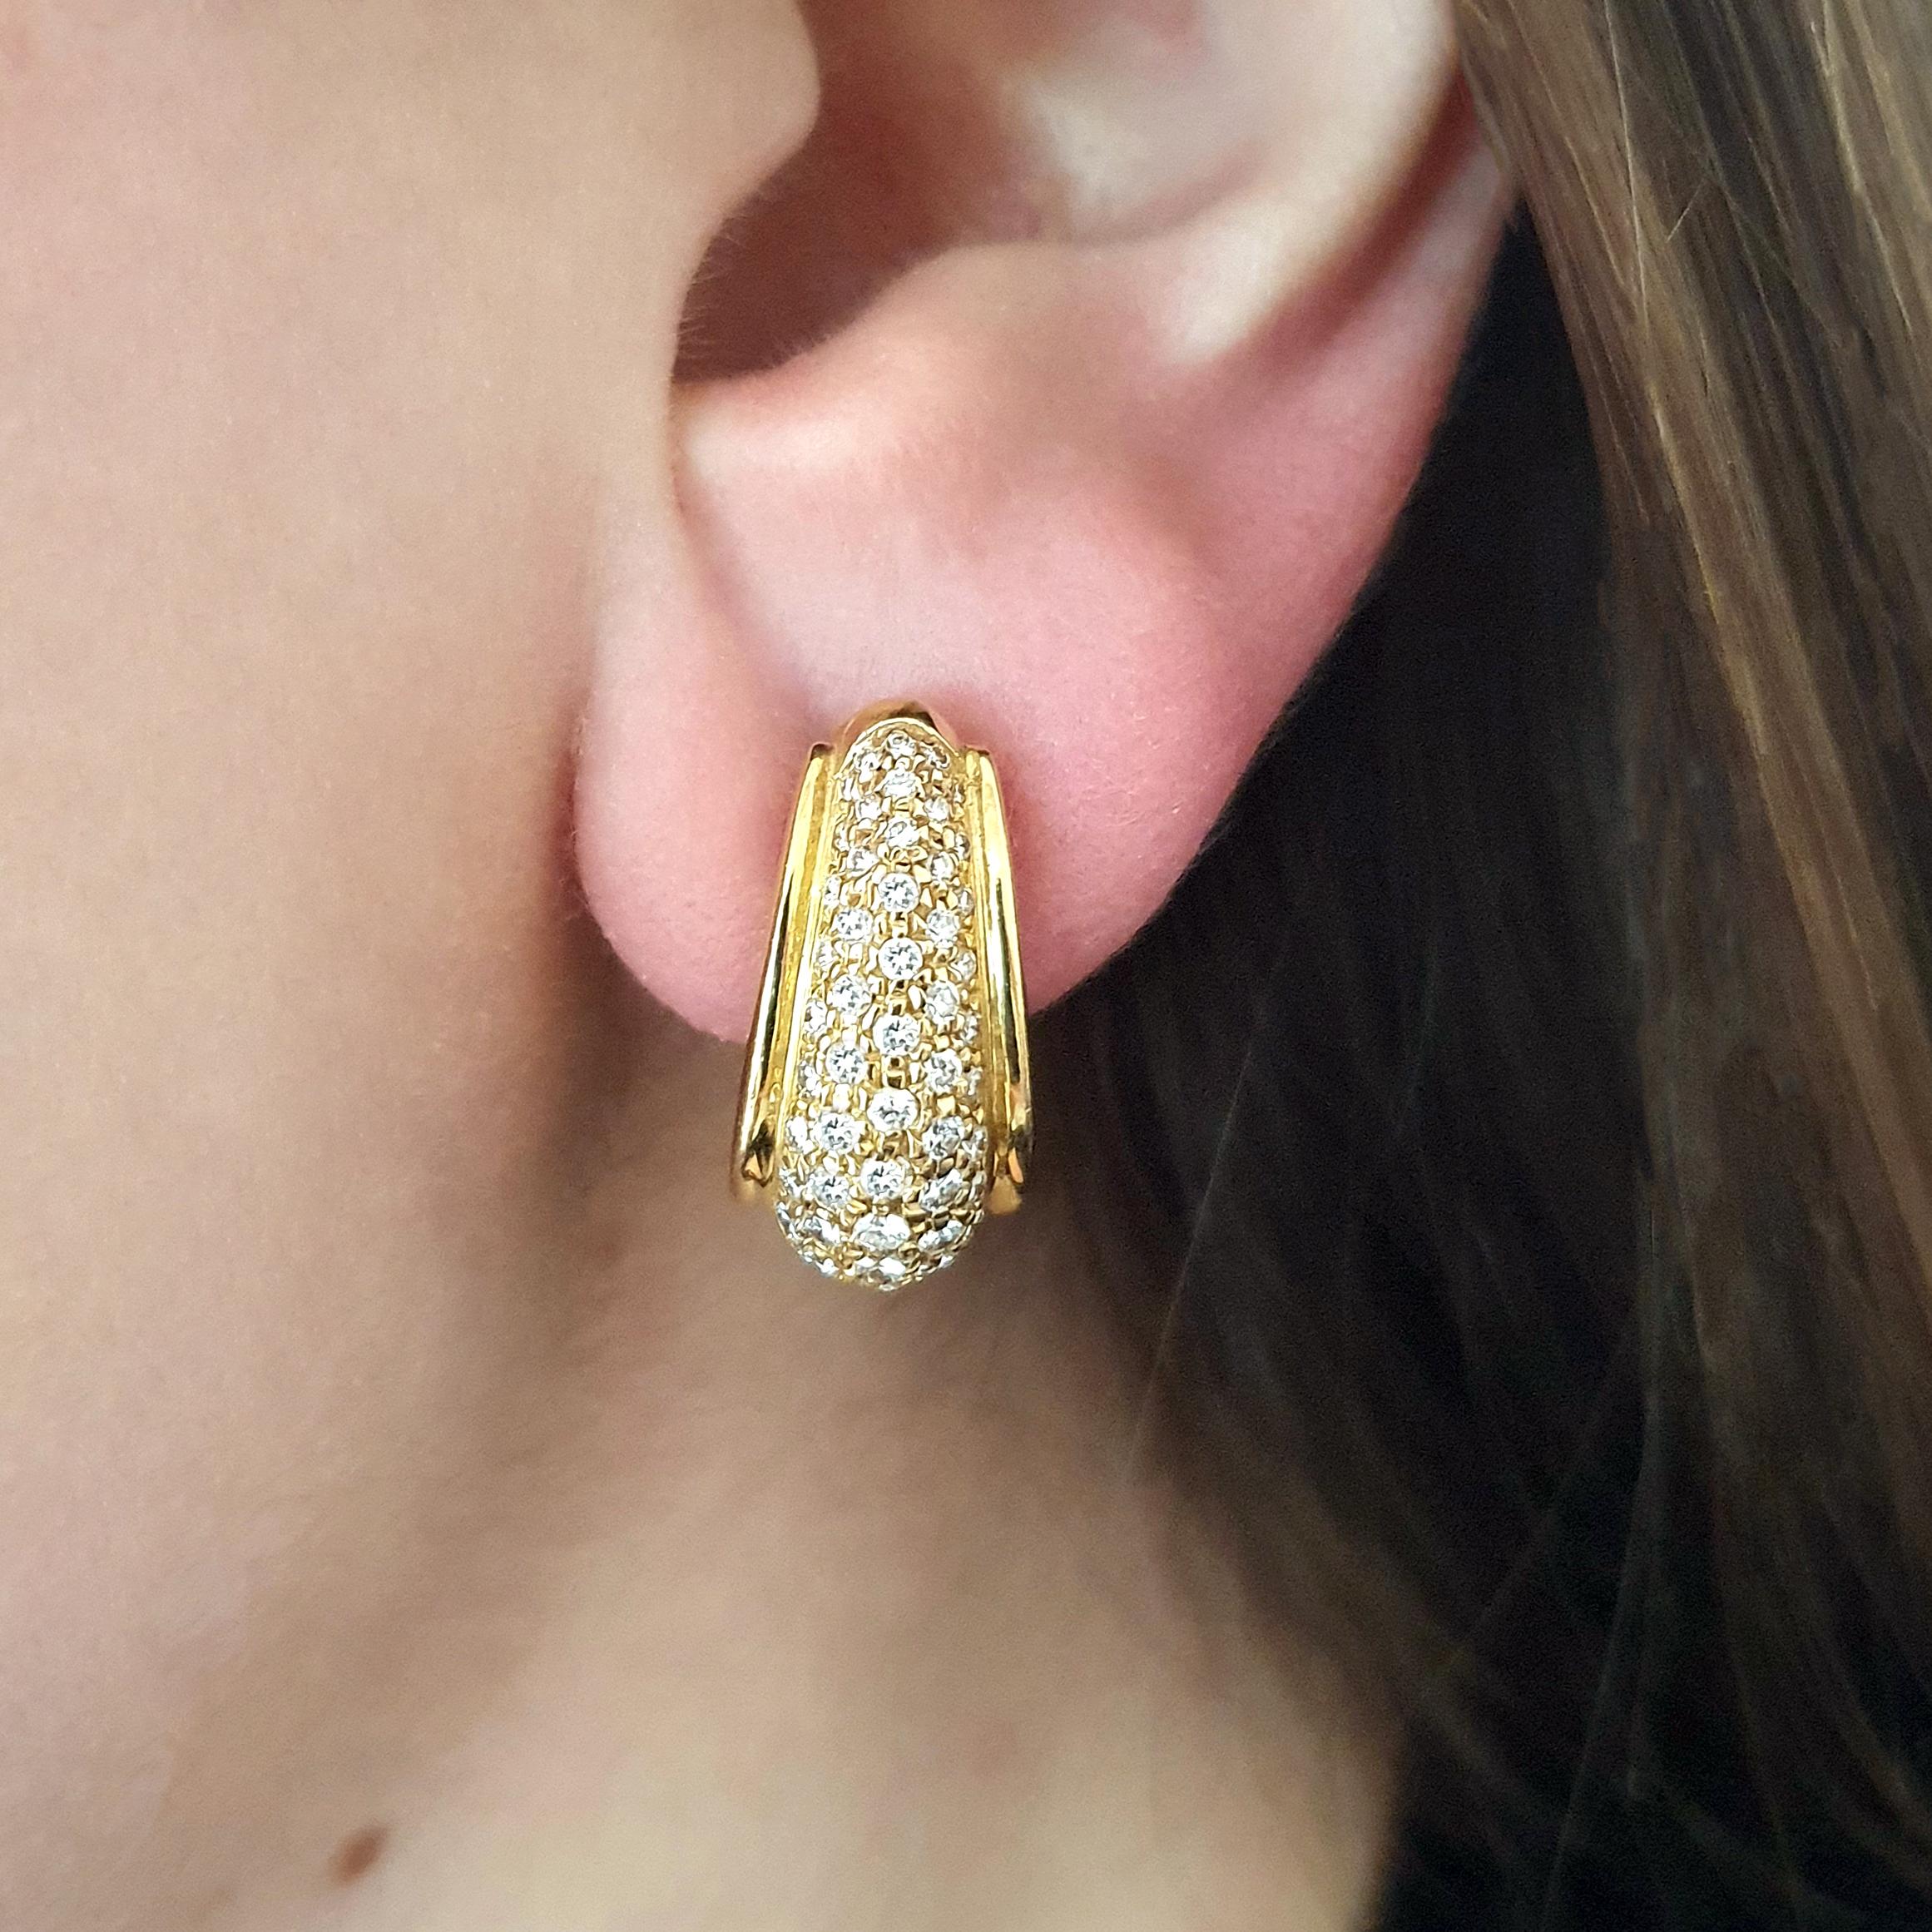 Diamond on Yellow Gold 18k Ear Clips.

Total height: 0.79 inch (2.00 centimeters).
Width at maximum: 0.39 inch (1.00 centimeter).
Total weight: 18.85 grams.